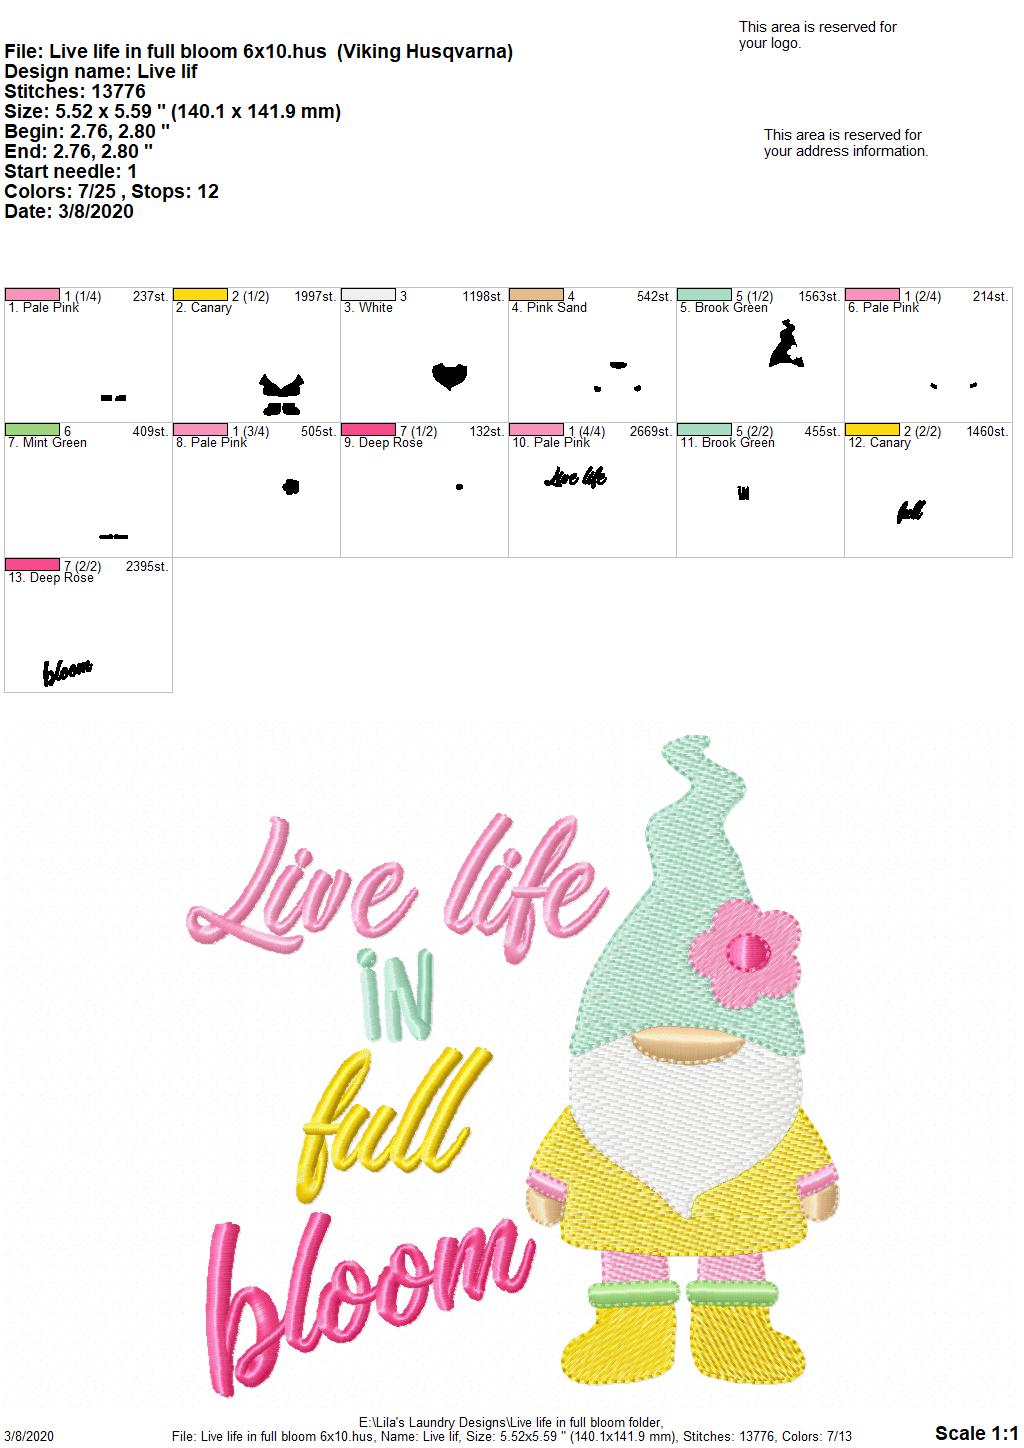 Live life in full bloom - 3 Sizes - Digital Embroidery Design